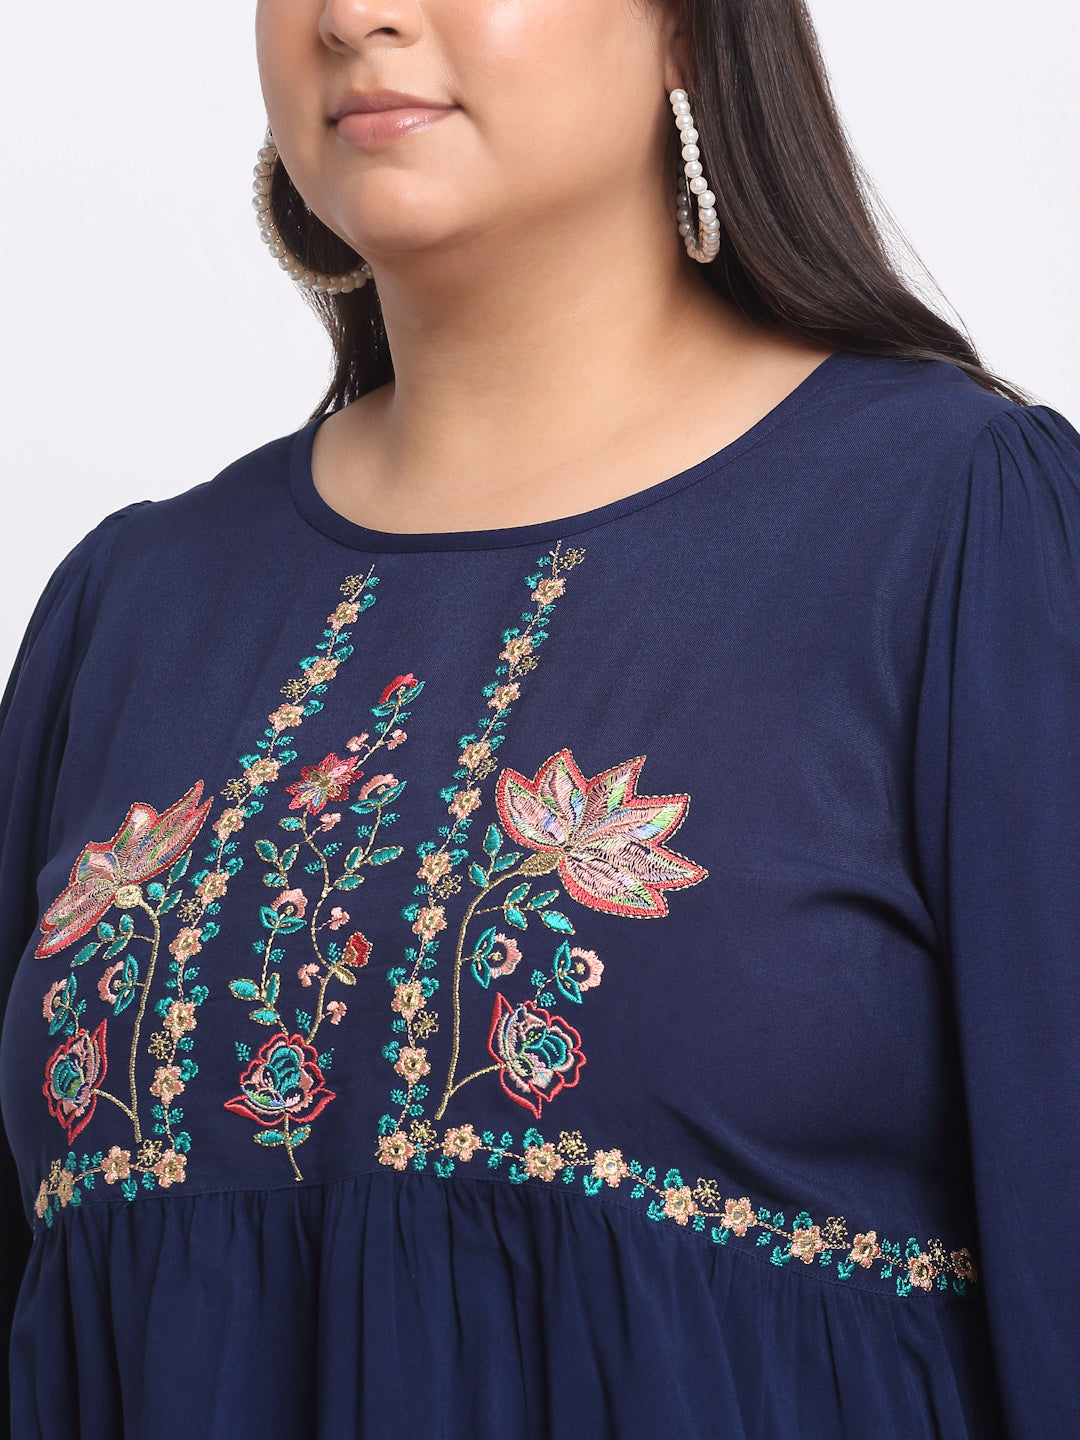 Plus Size Floral Embroidered Top